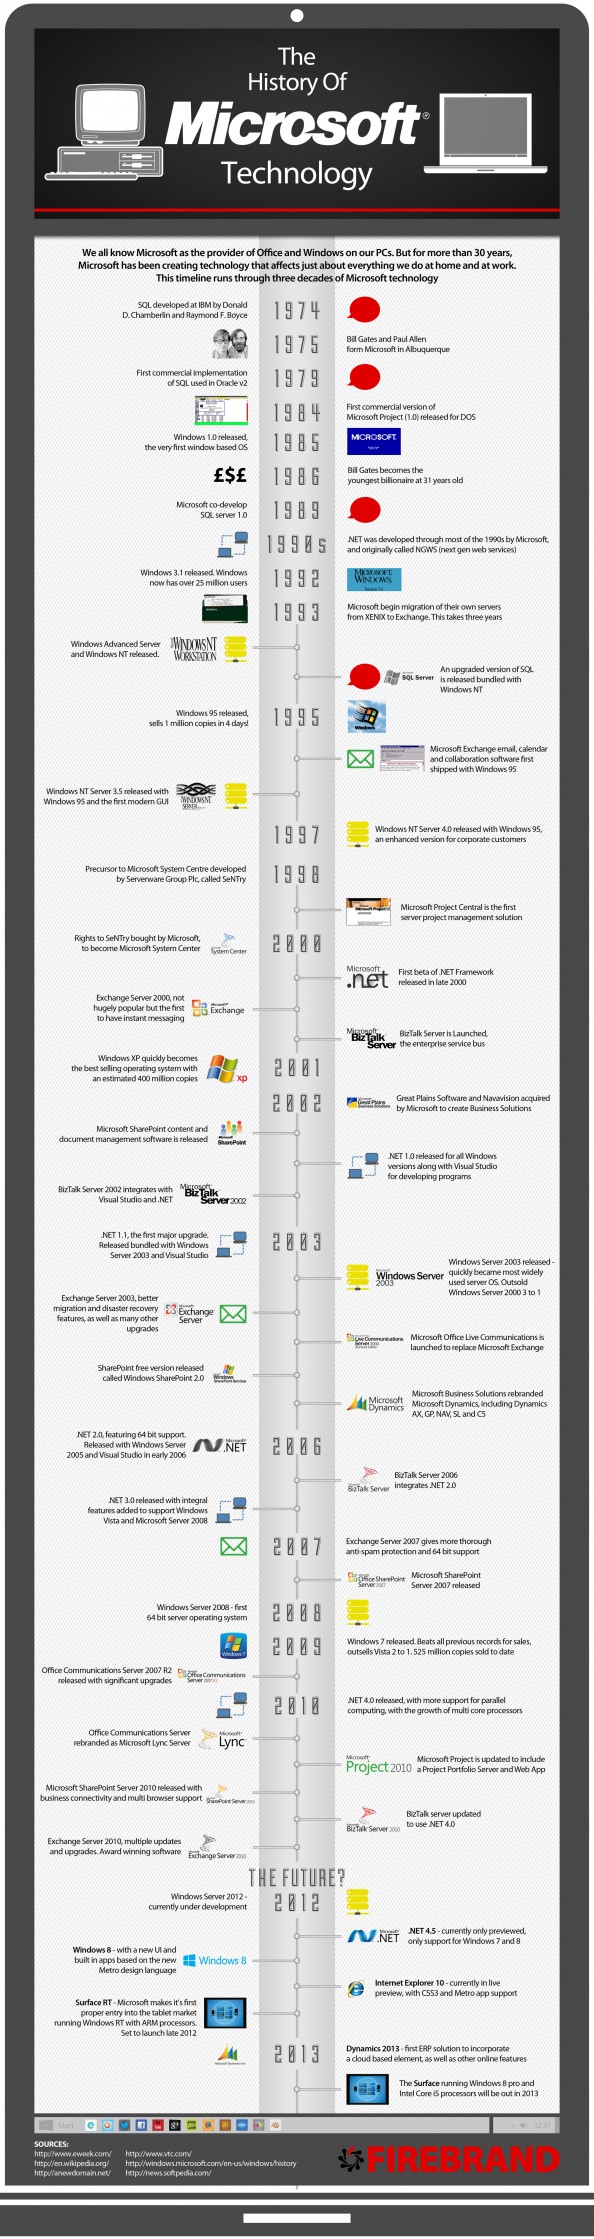 The History of Microsoft Technology